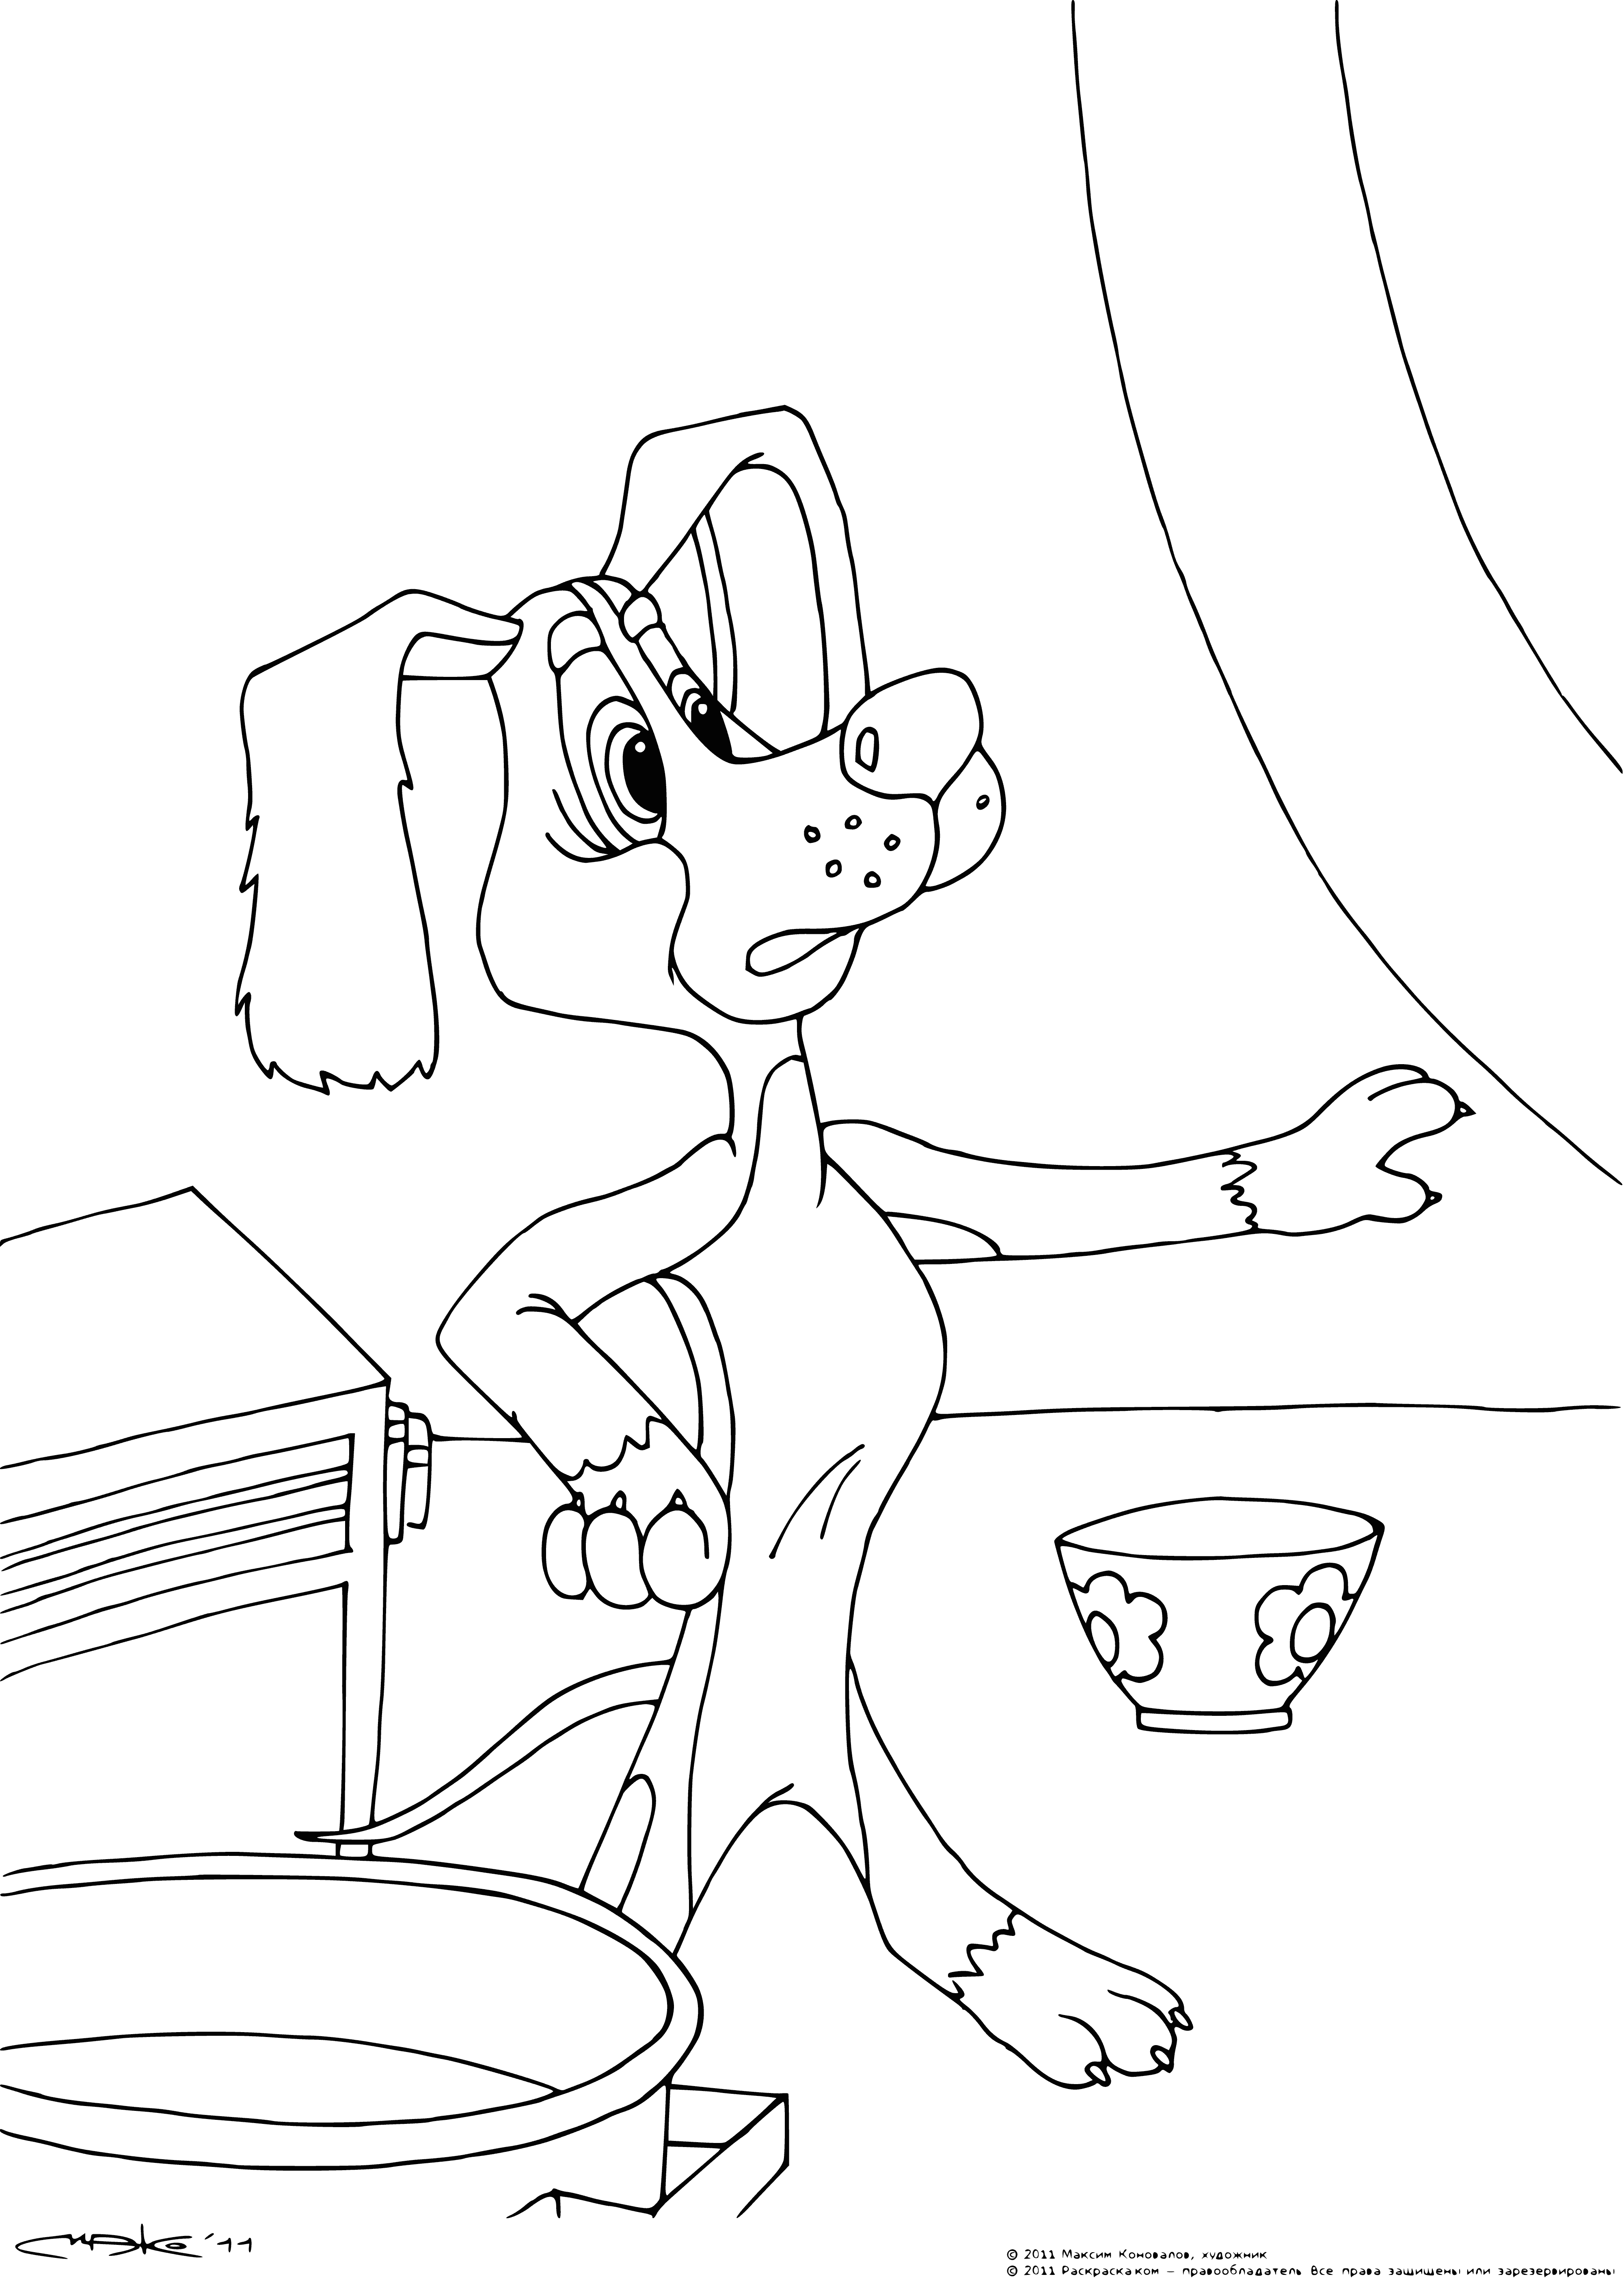 coloring page: Bobik is visiting Barbos the cat, but can't touch the cat's toys - they're off limits! #pets